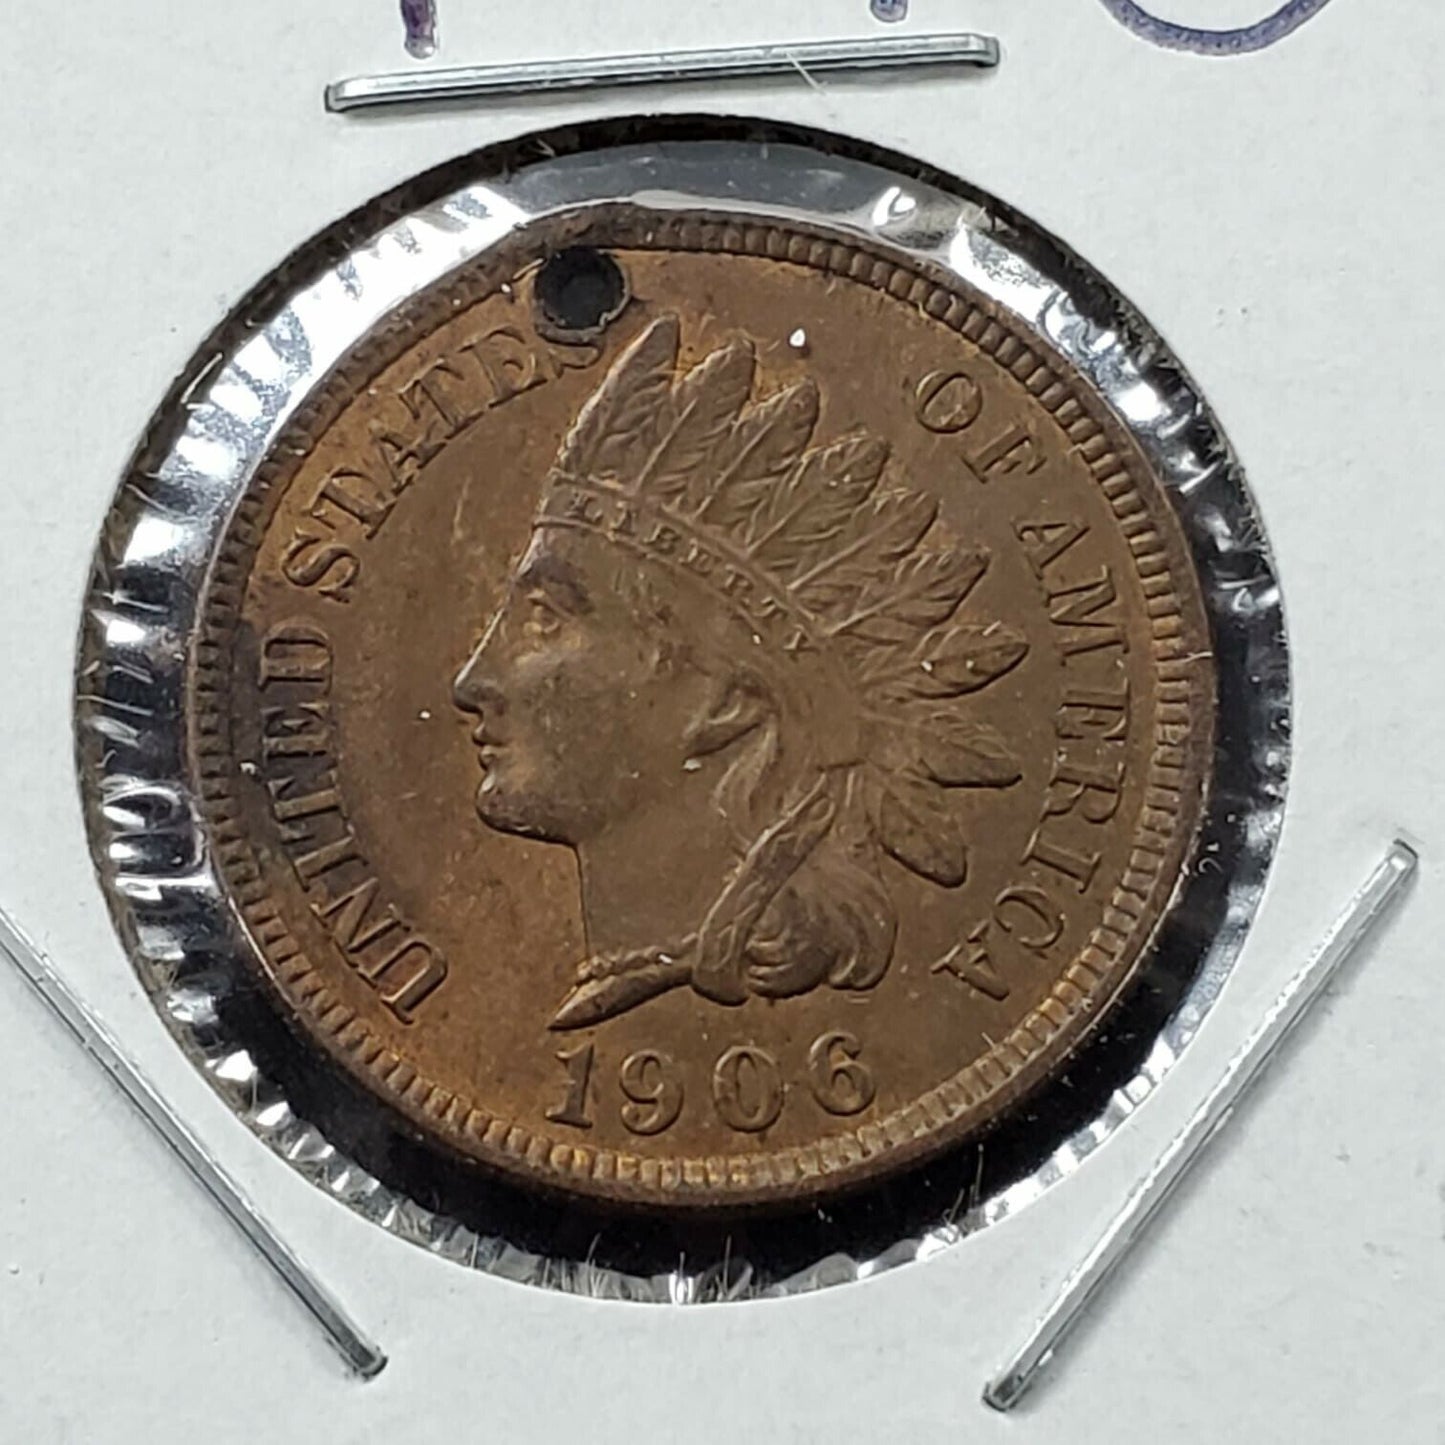 1906 P Indian Head Cent Penny Coin CH AU Details Holed Jewelry for Pendant